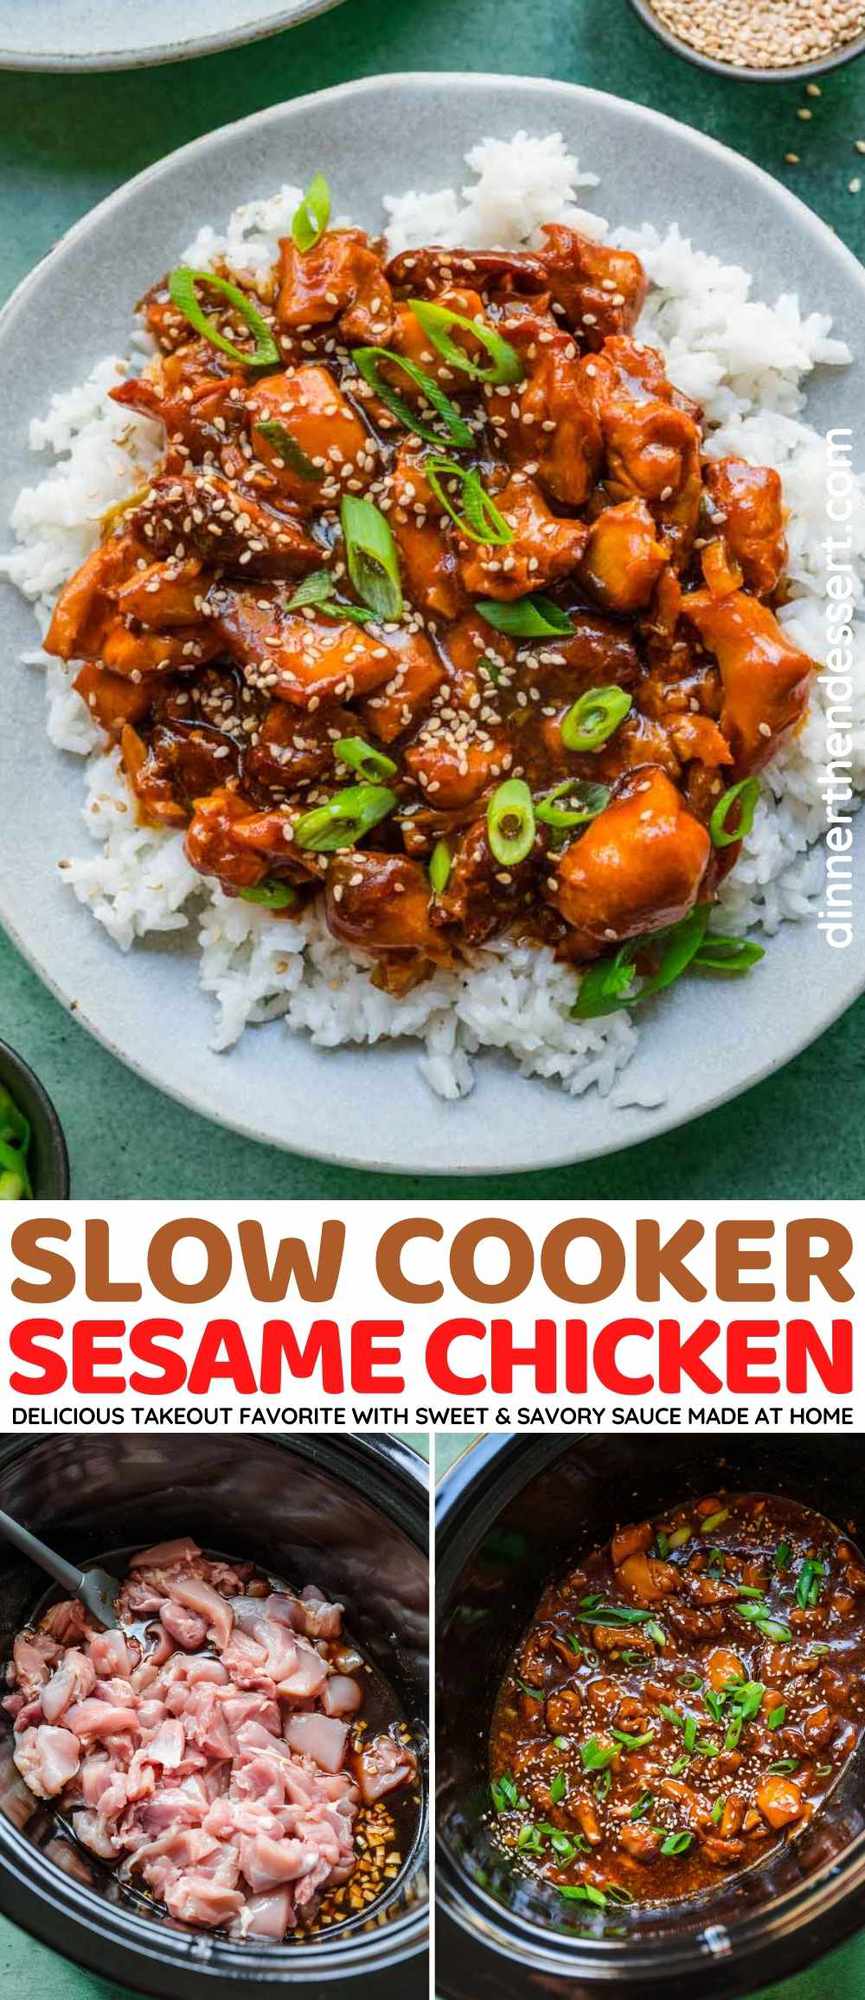 Slow Cooker Sesame Chicken collage